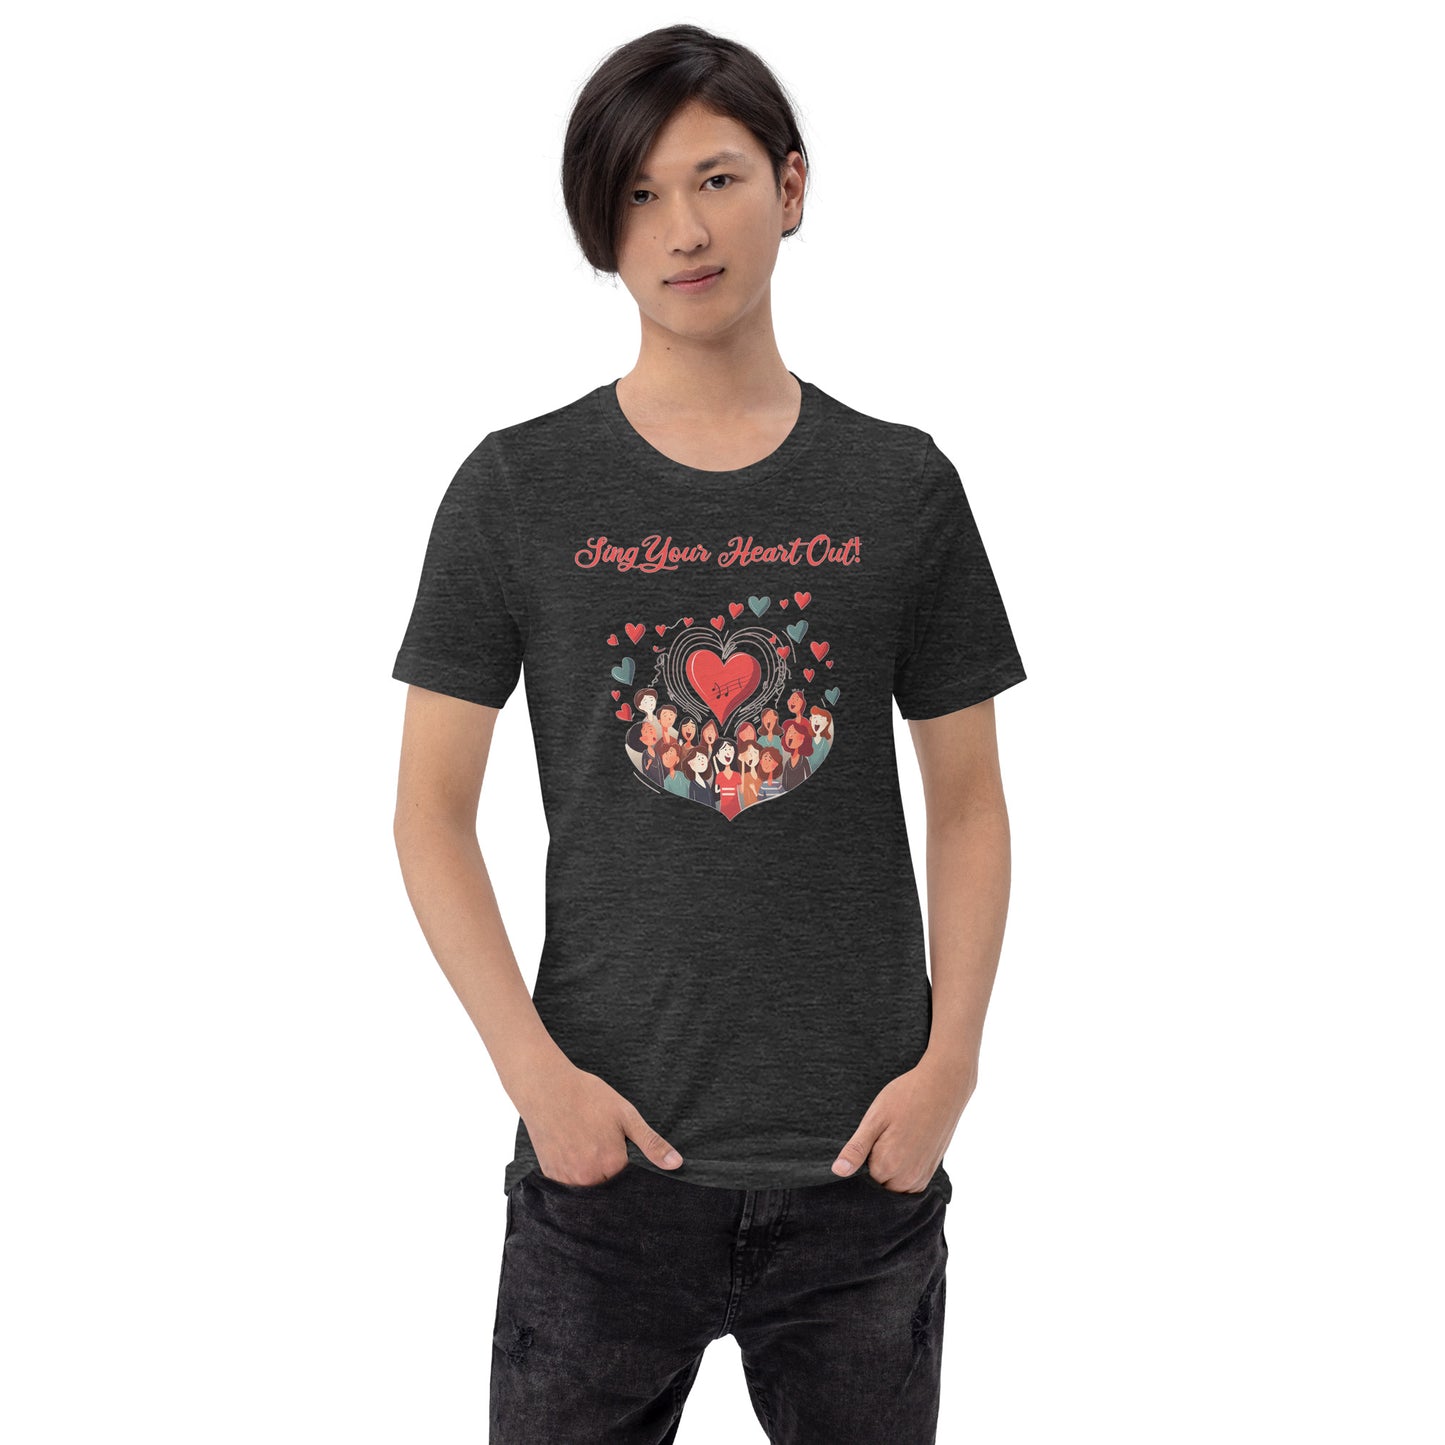 Sing Your Heart Out - Unisex t-shirt